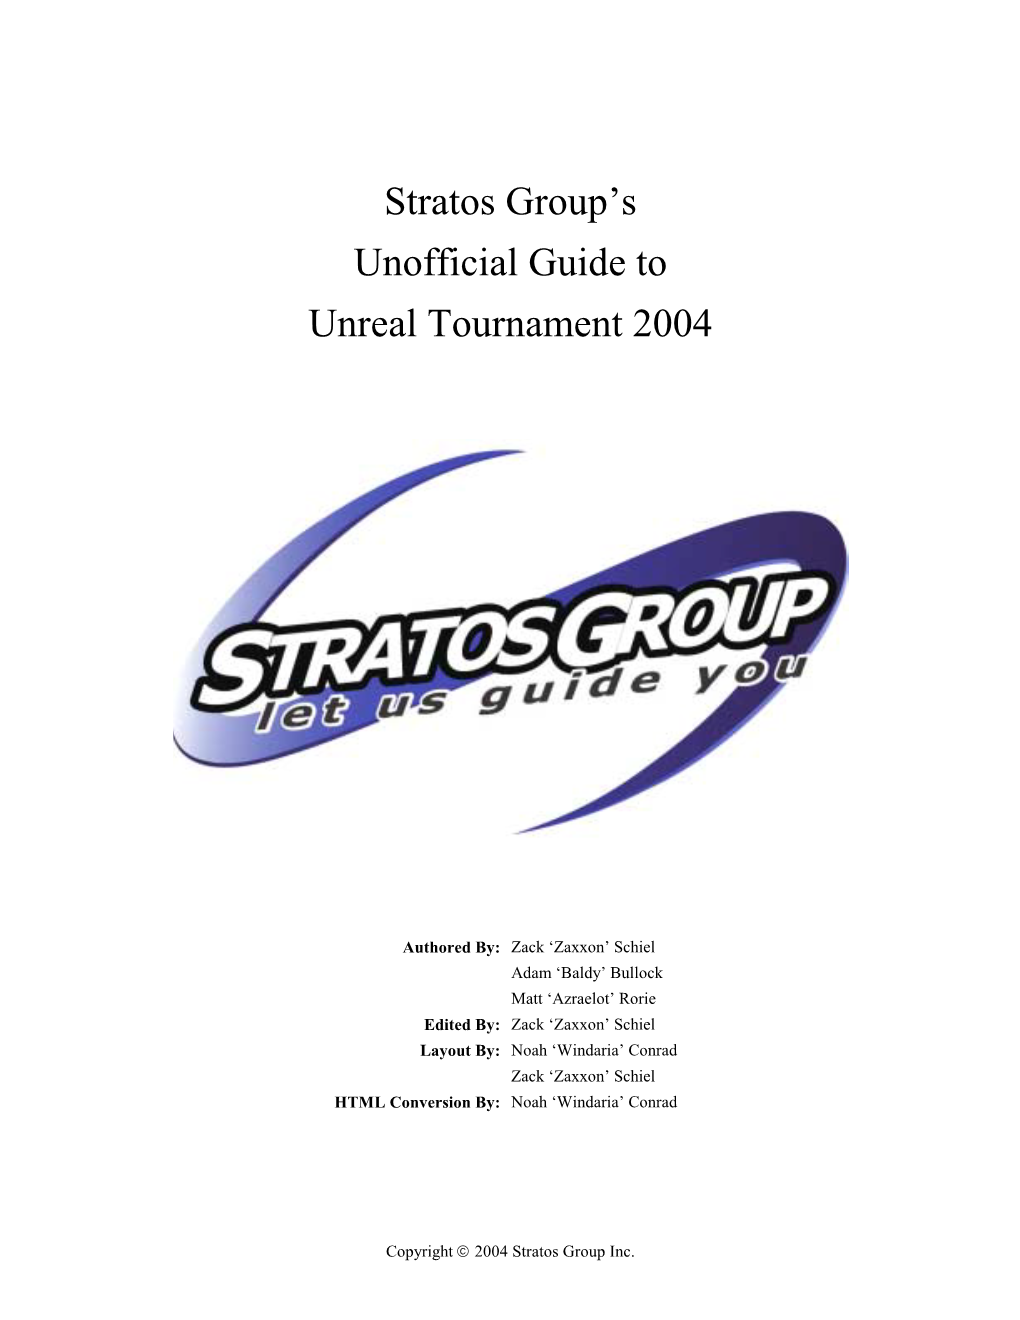 Stratos Group's Unofficial Guide to Unreal Tournament 2004